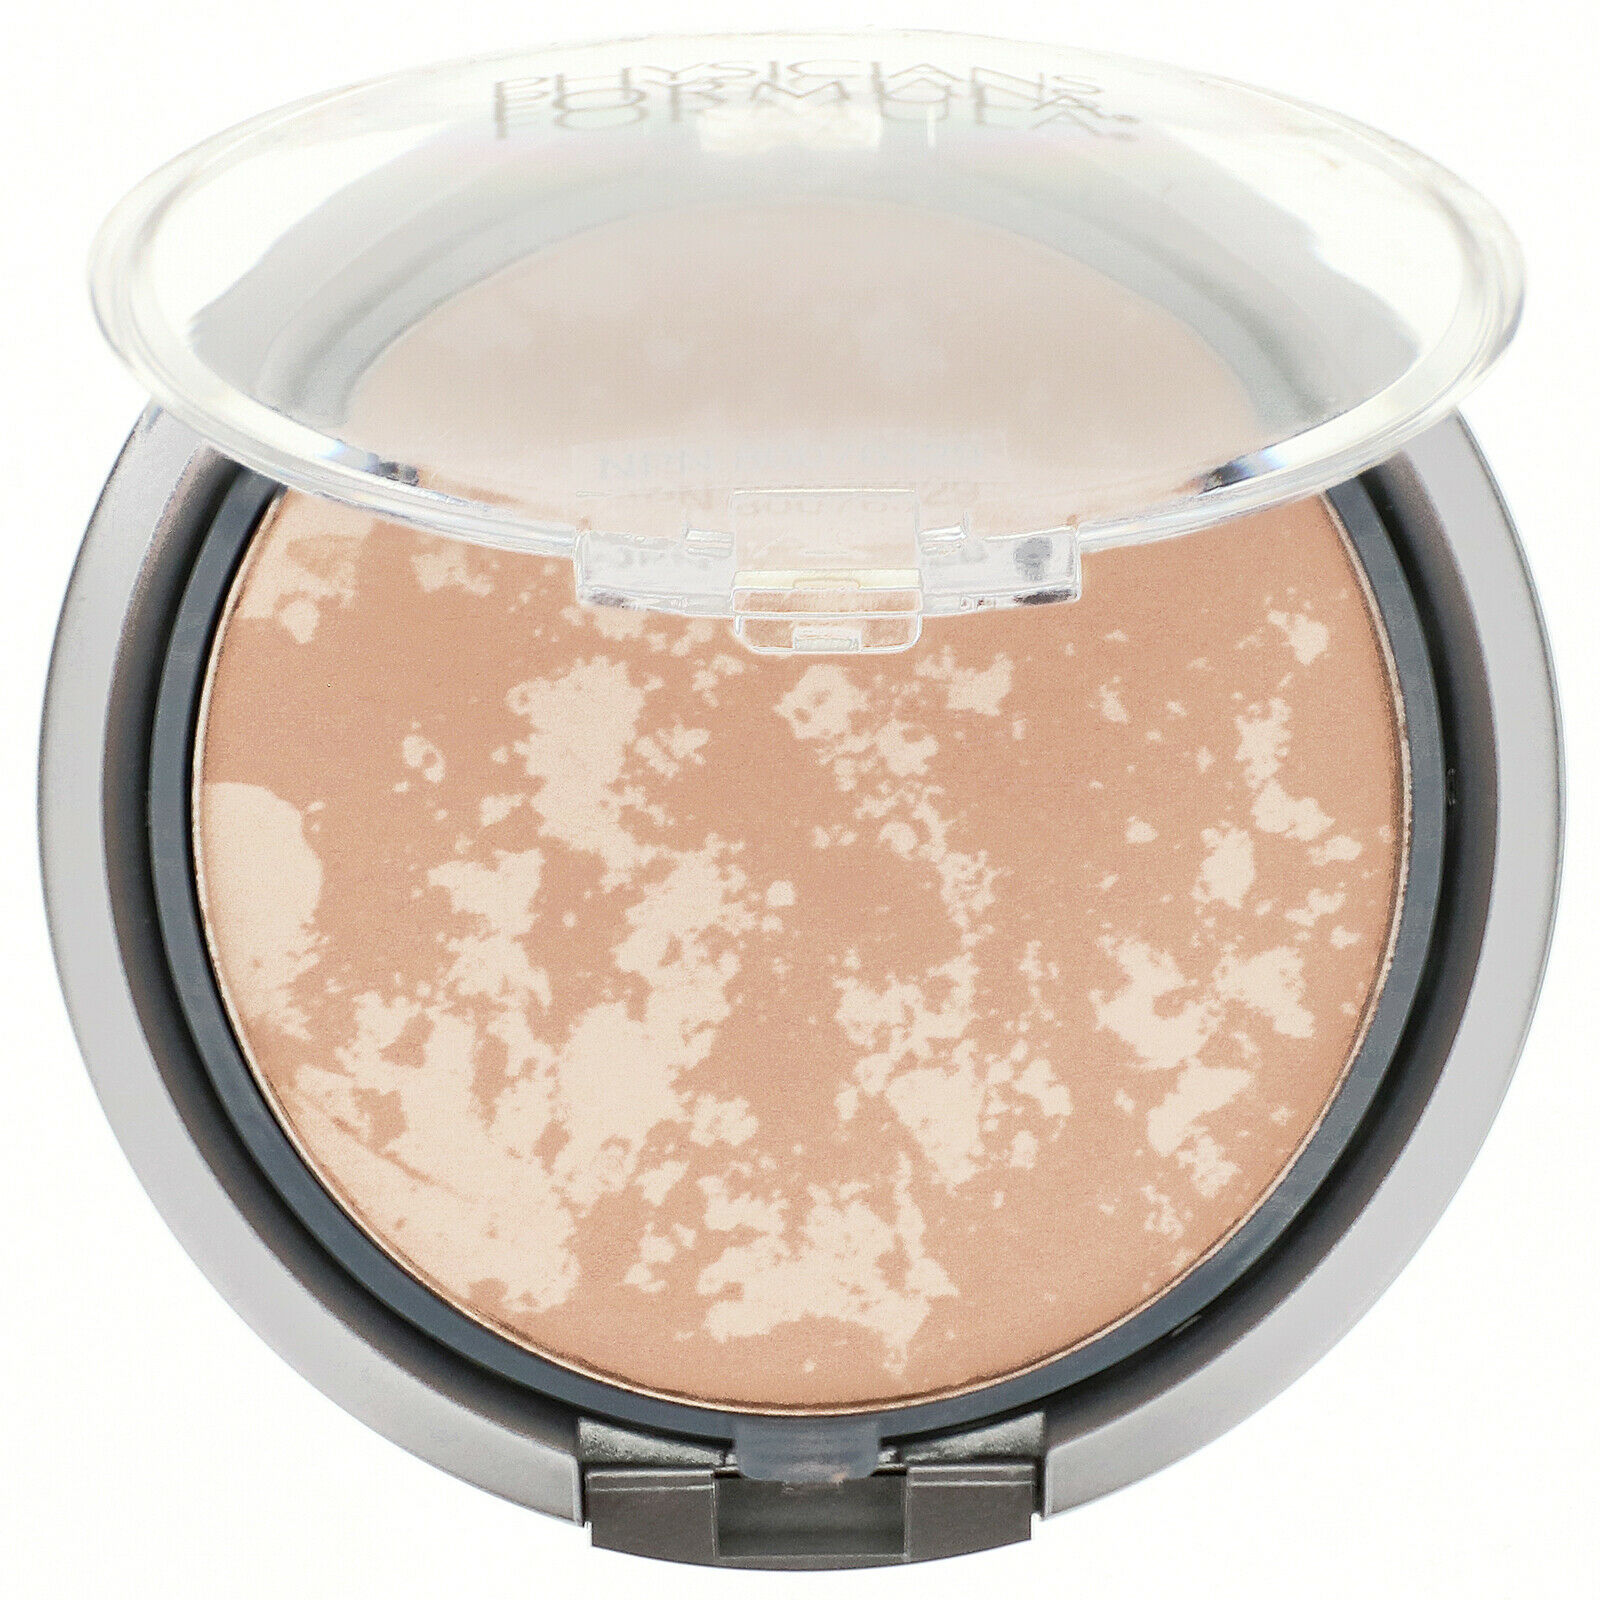 Physicians Formula Mineral Wear Talc-free Mineral Face Powder, Translucent #3835 - $9.75